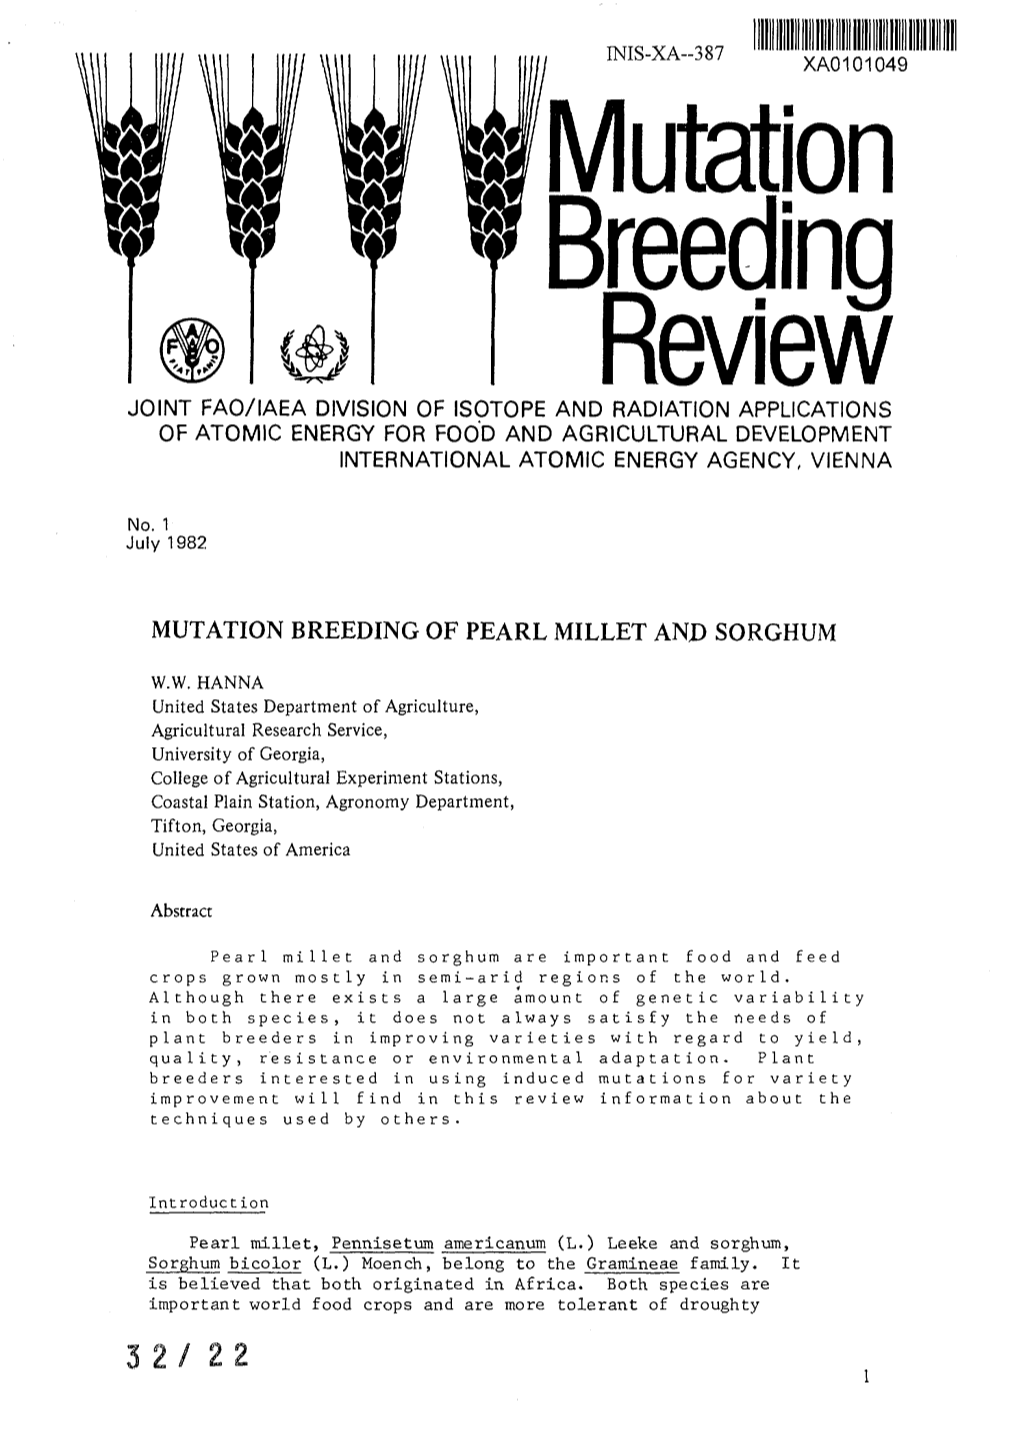 Mutation Breeding of Pearl Millet and Sorghum